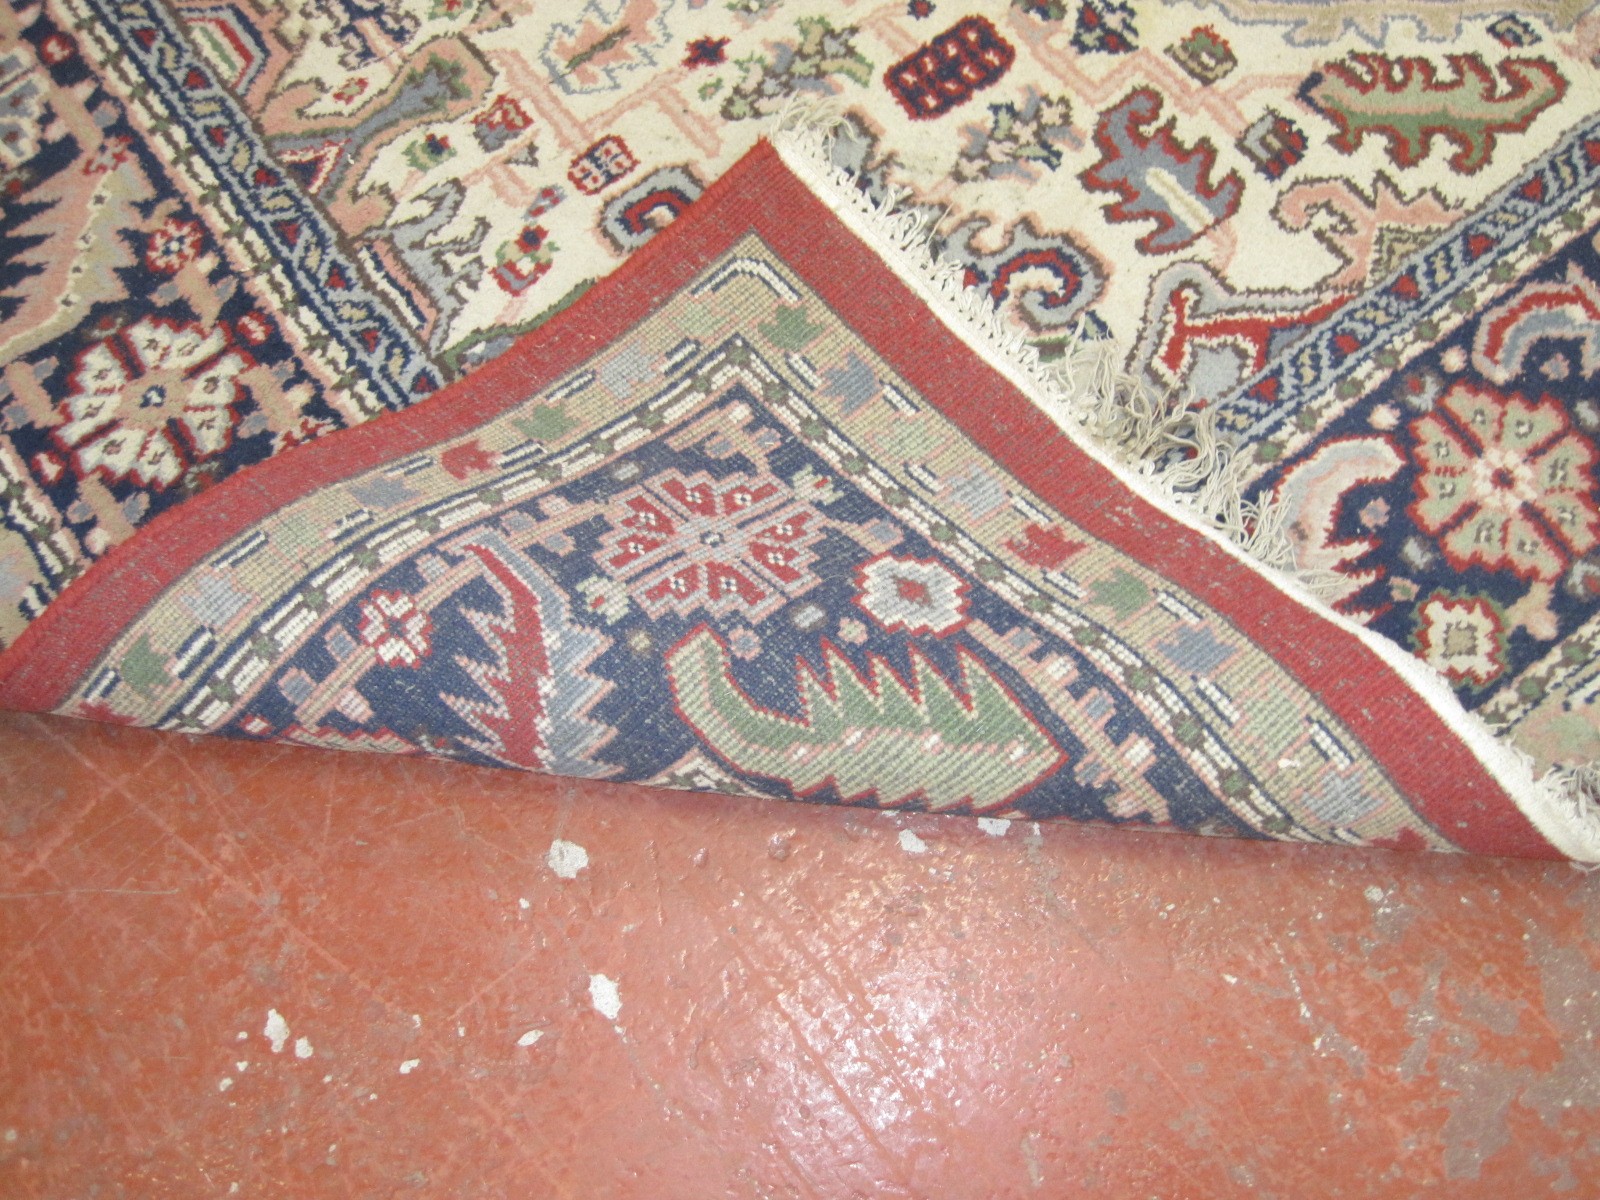 A European carpet with stylized decoration approx 350 x 250cm - Image 2 of 2